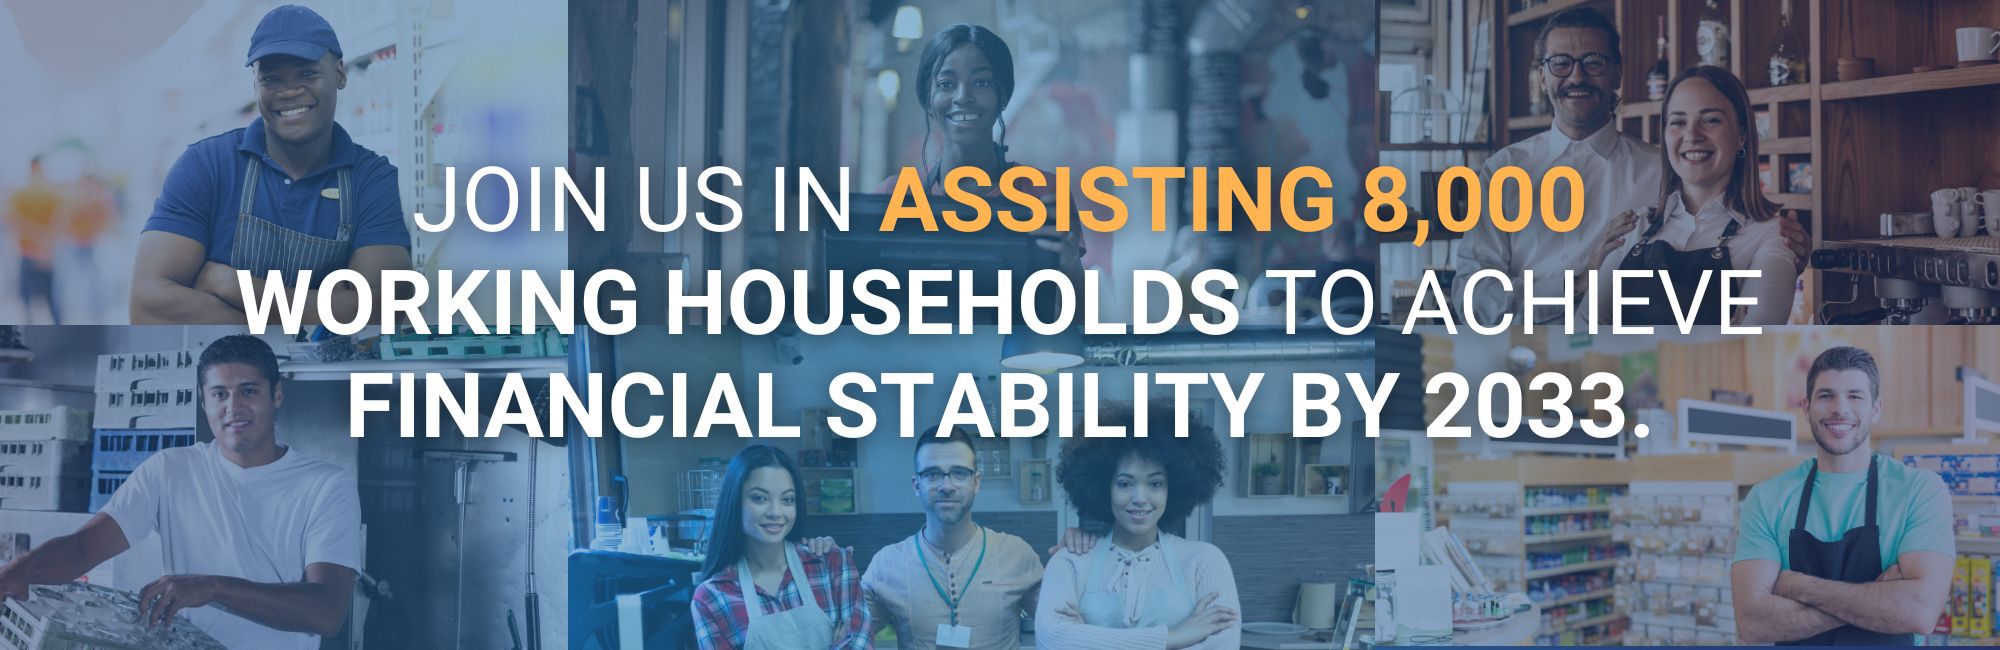 Assisting 8,00 working households achieve financial stability by 2033